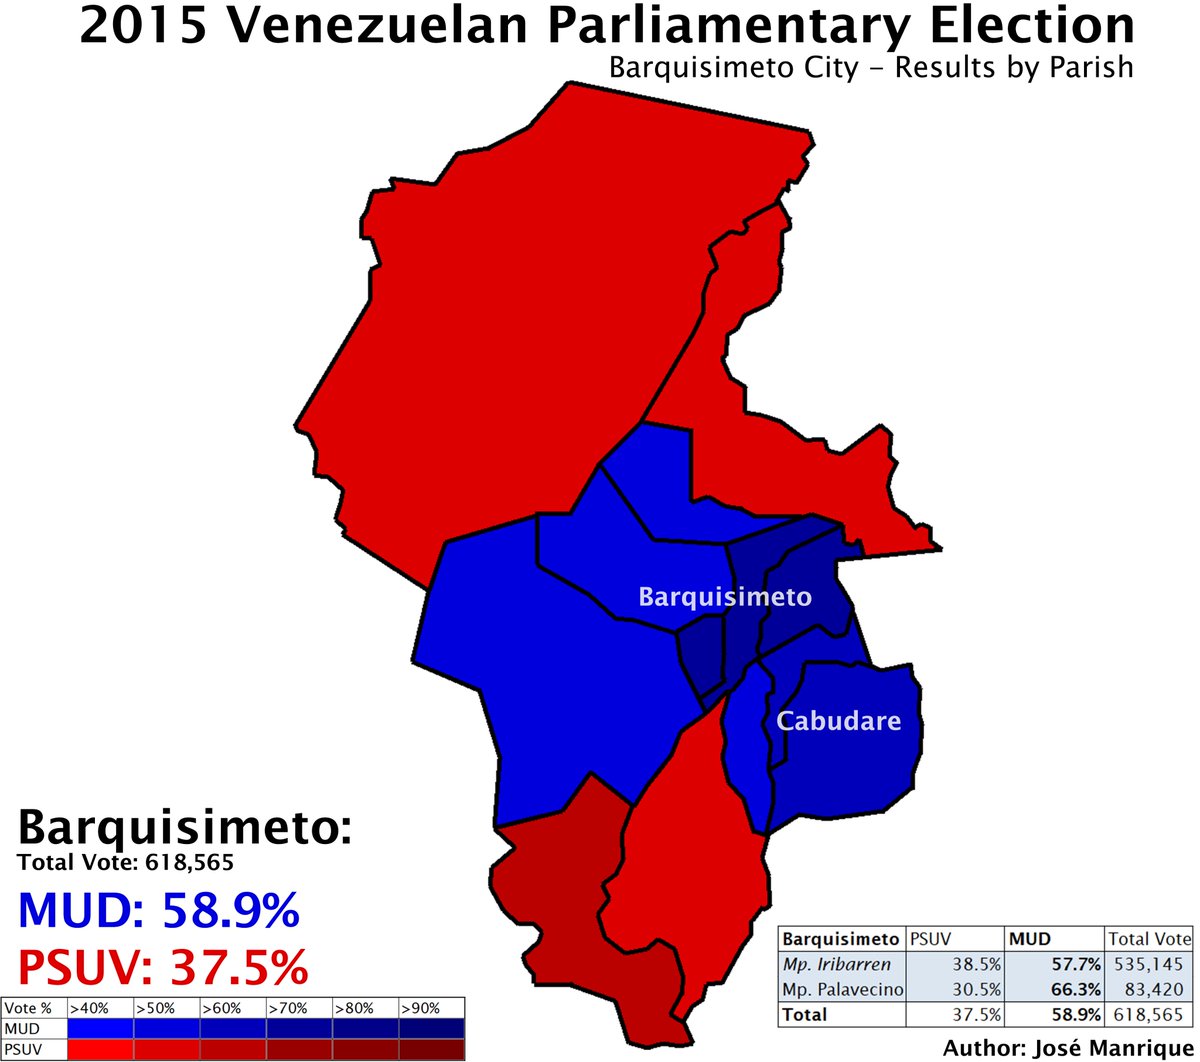 The largest cities in the country featured similar results. The PSUV was blown out of the water in Maracaibo, Valencia, Maracay and Barquisimeto. The MUD won almost every electoral circuit located in these cities.